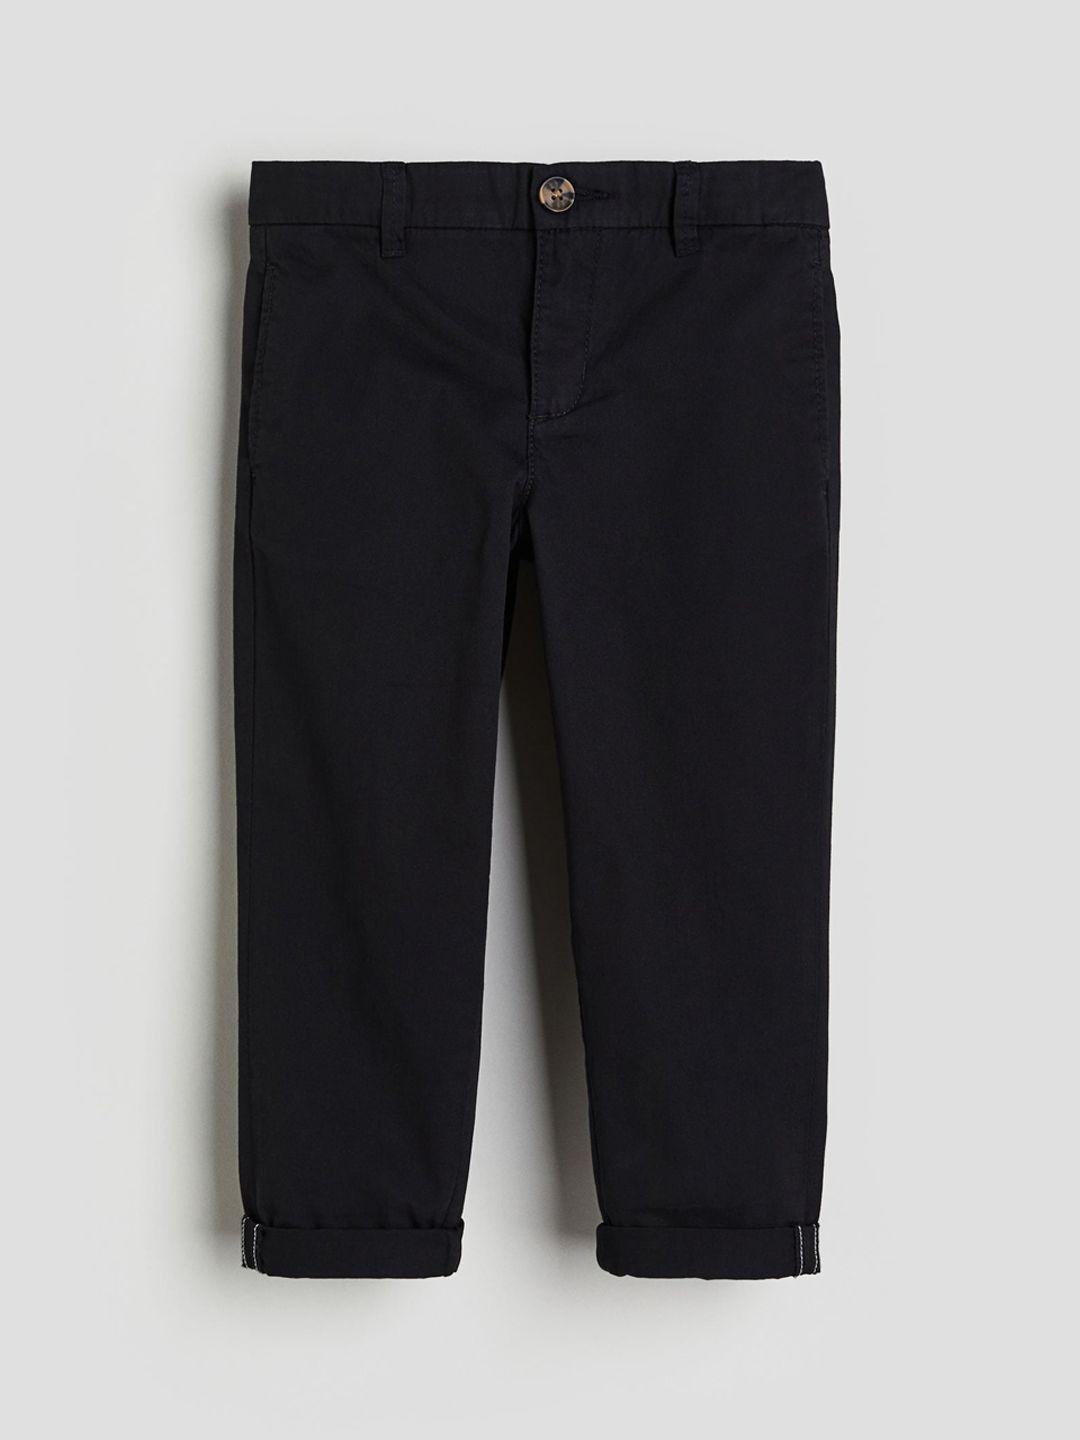 H&M Boys Twill Chinos Trousers